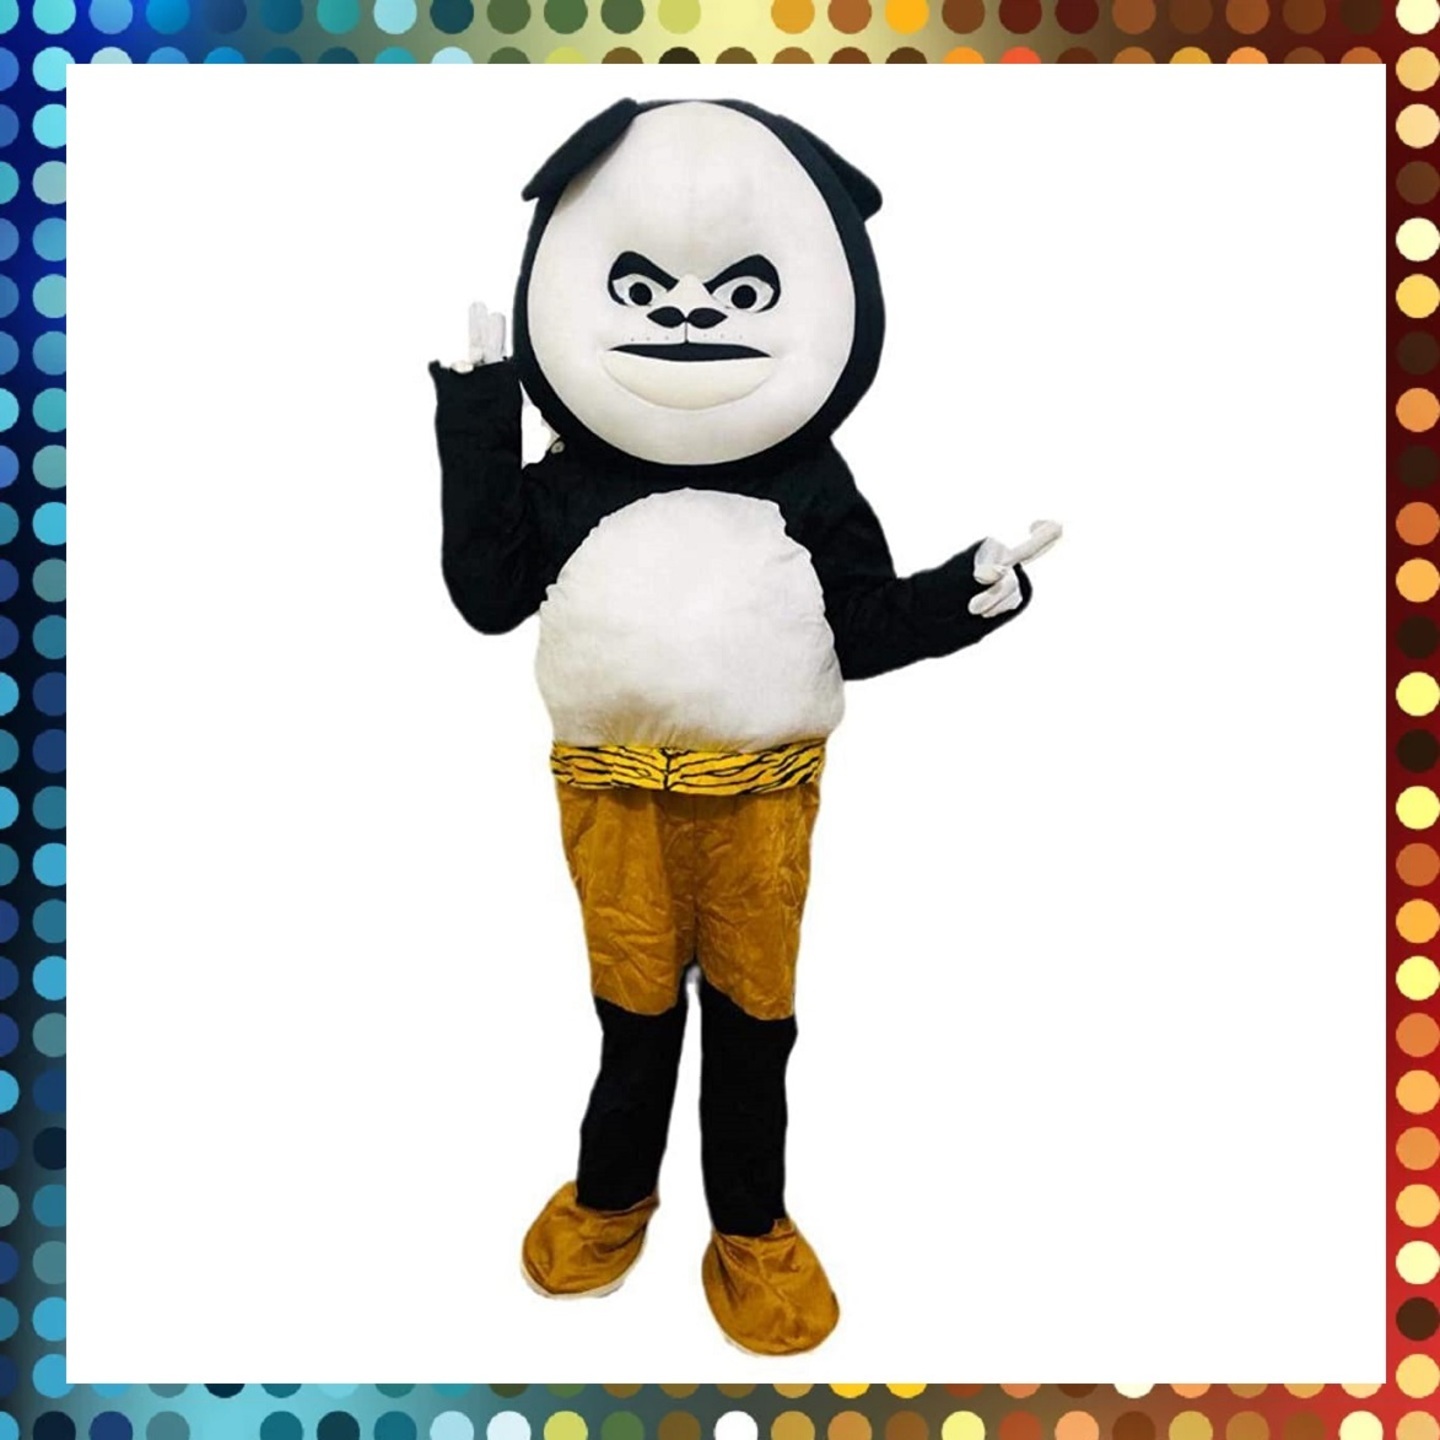 Rental: Panda Mascot for Kids Party and Events